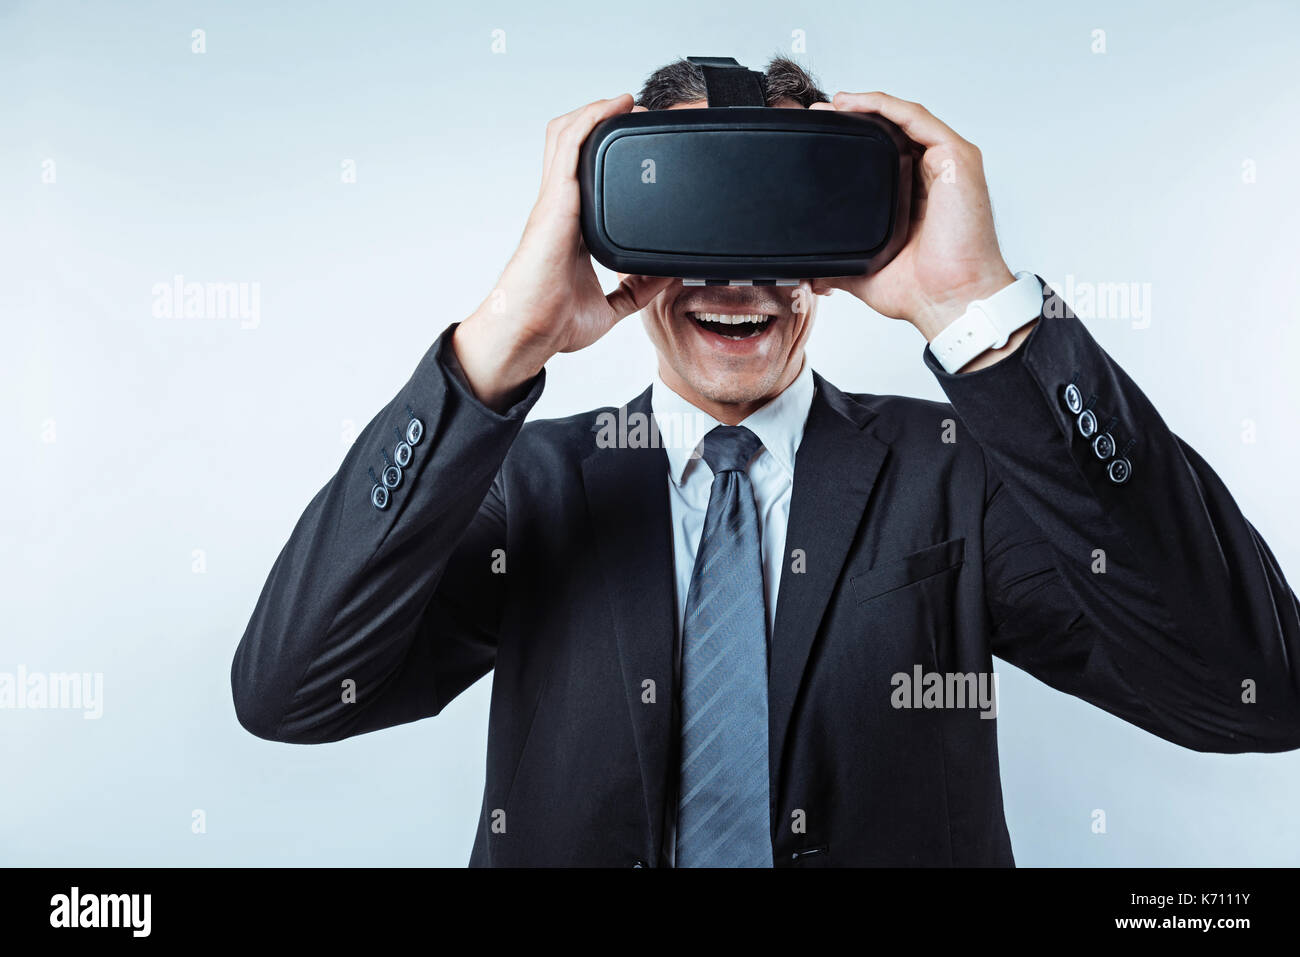 Amazed man of business trying on visual reality headset Stock Photo